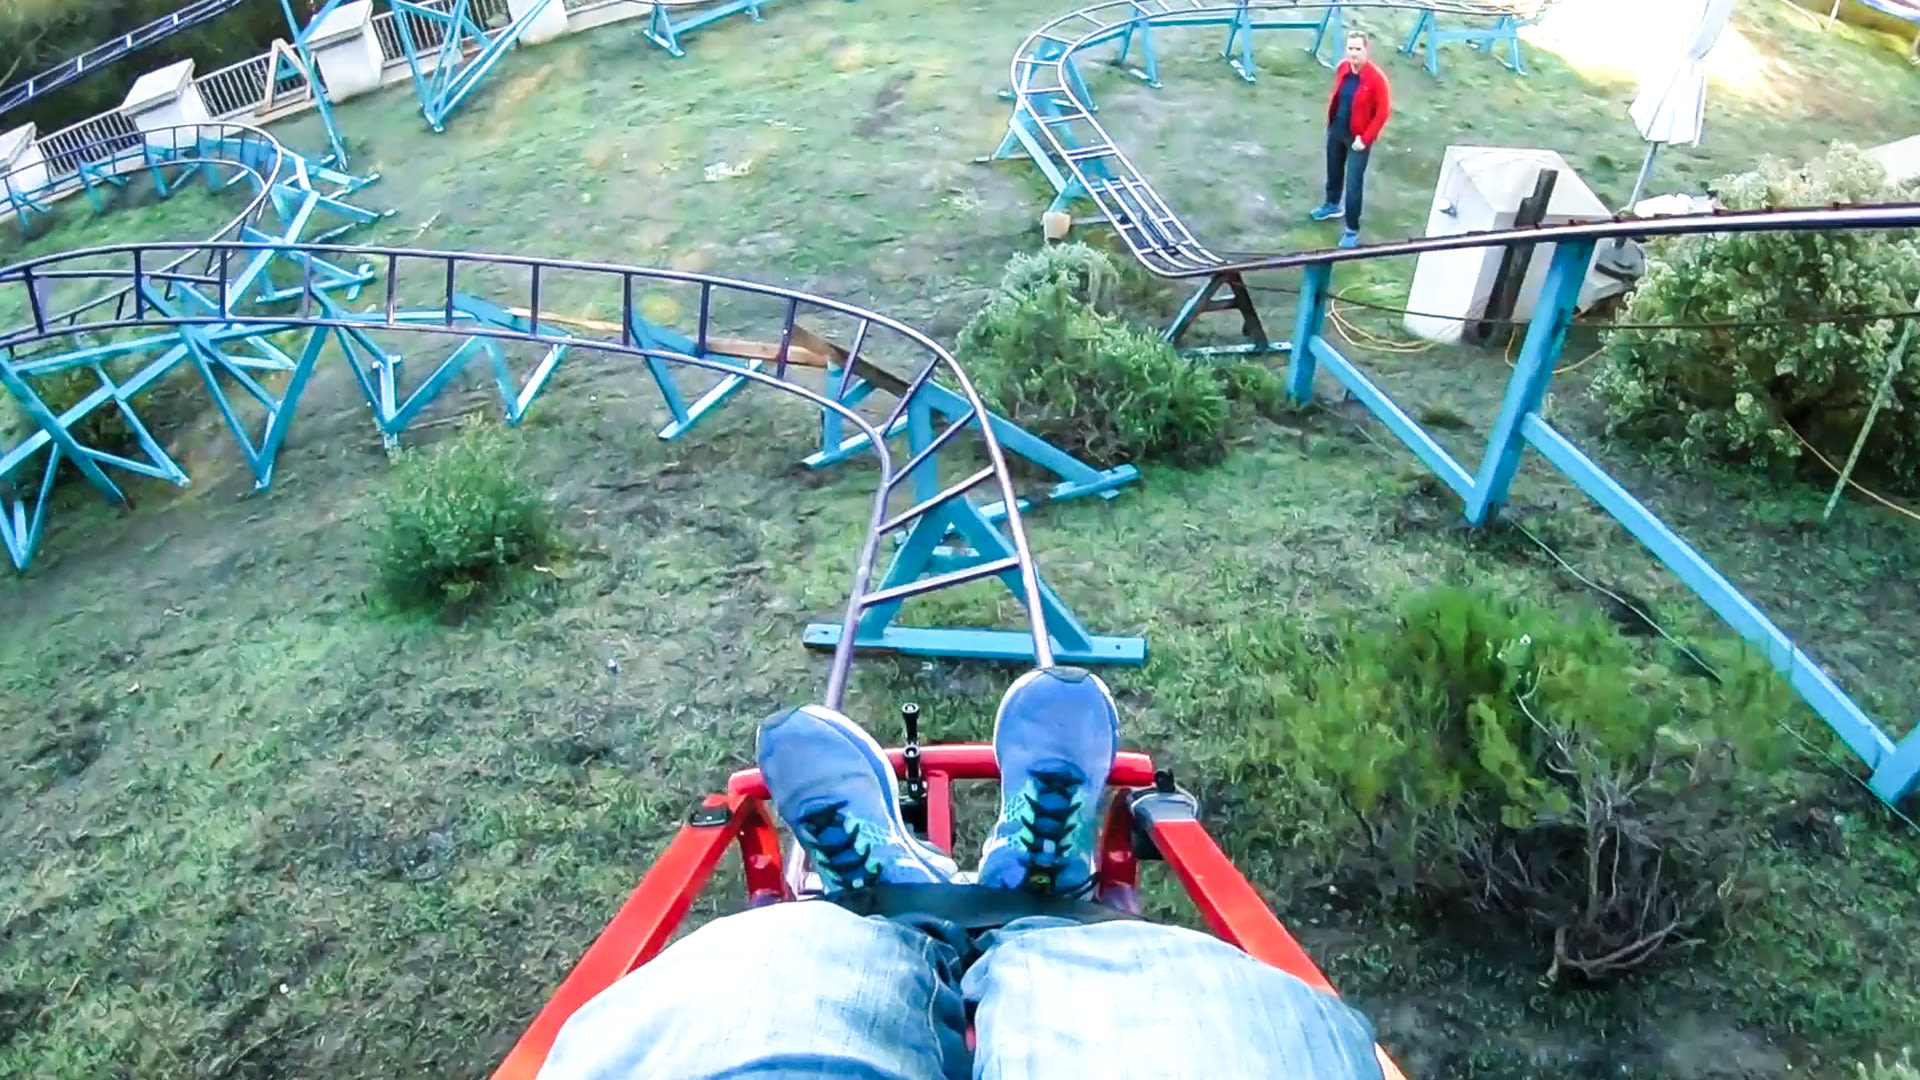 Watch How This Guy Built Roller Coaster In His Backyard | | WIRED